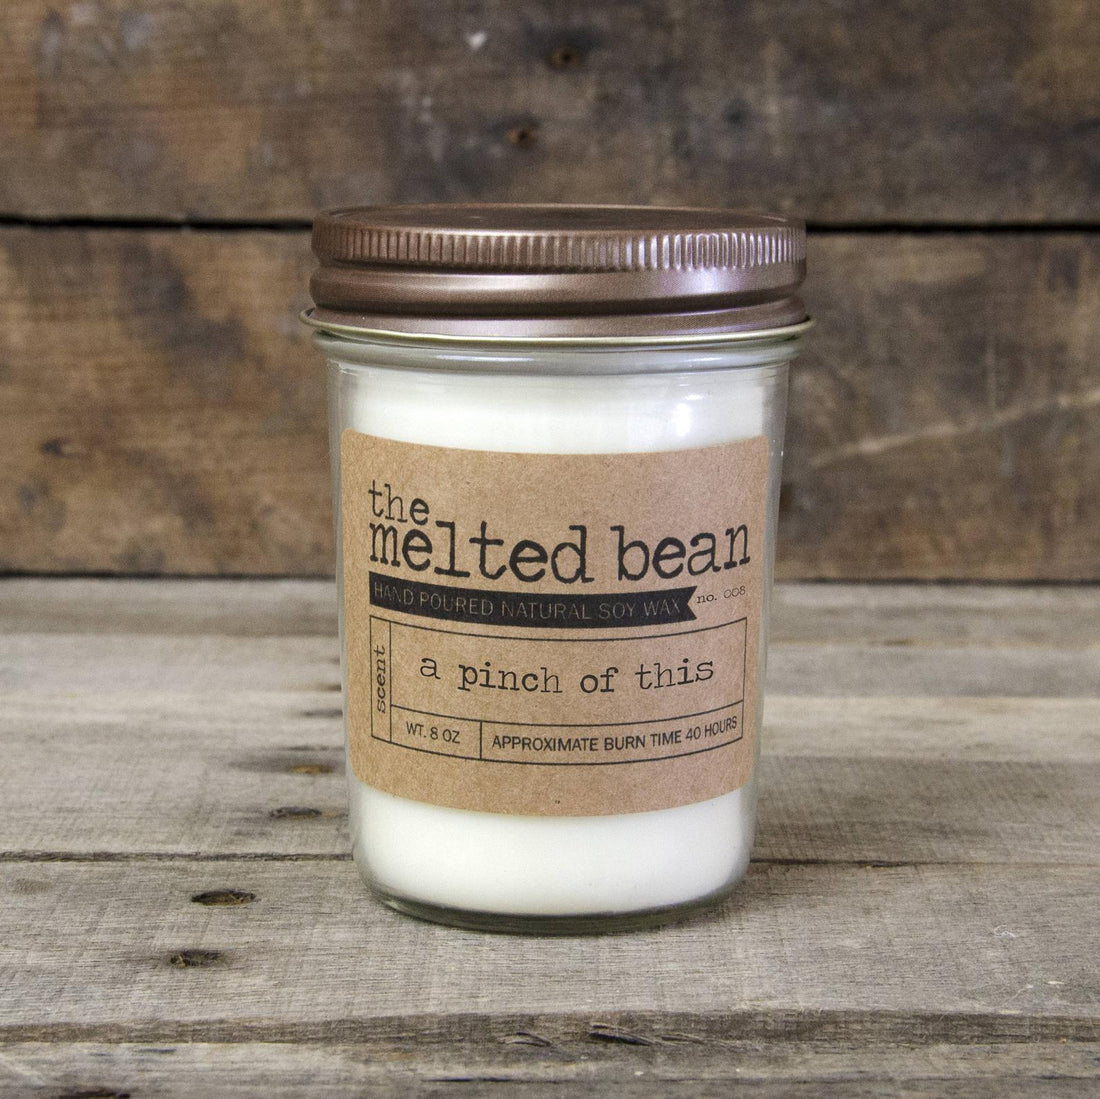 A Pinch of This Candle by The Melted Bean